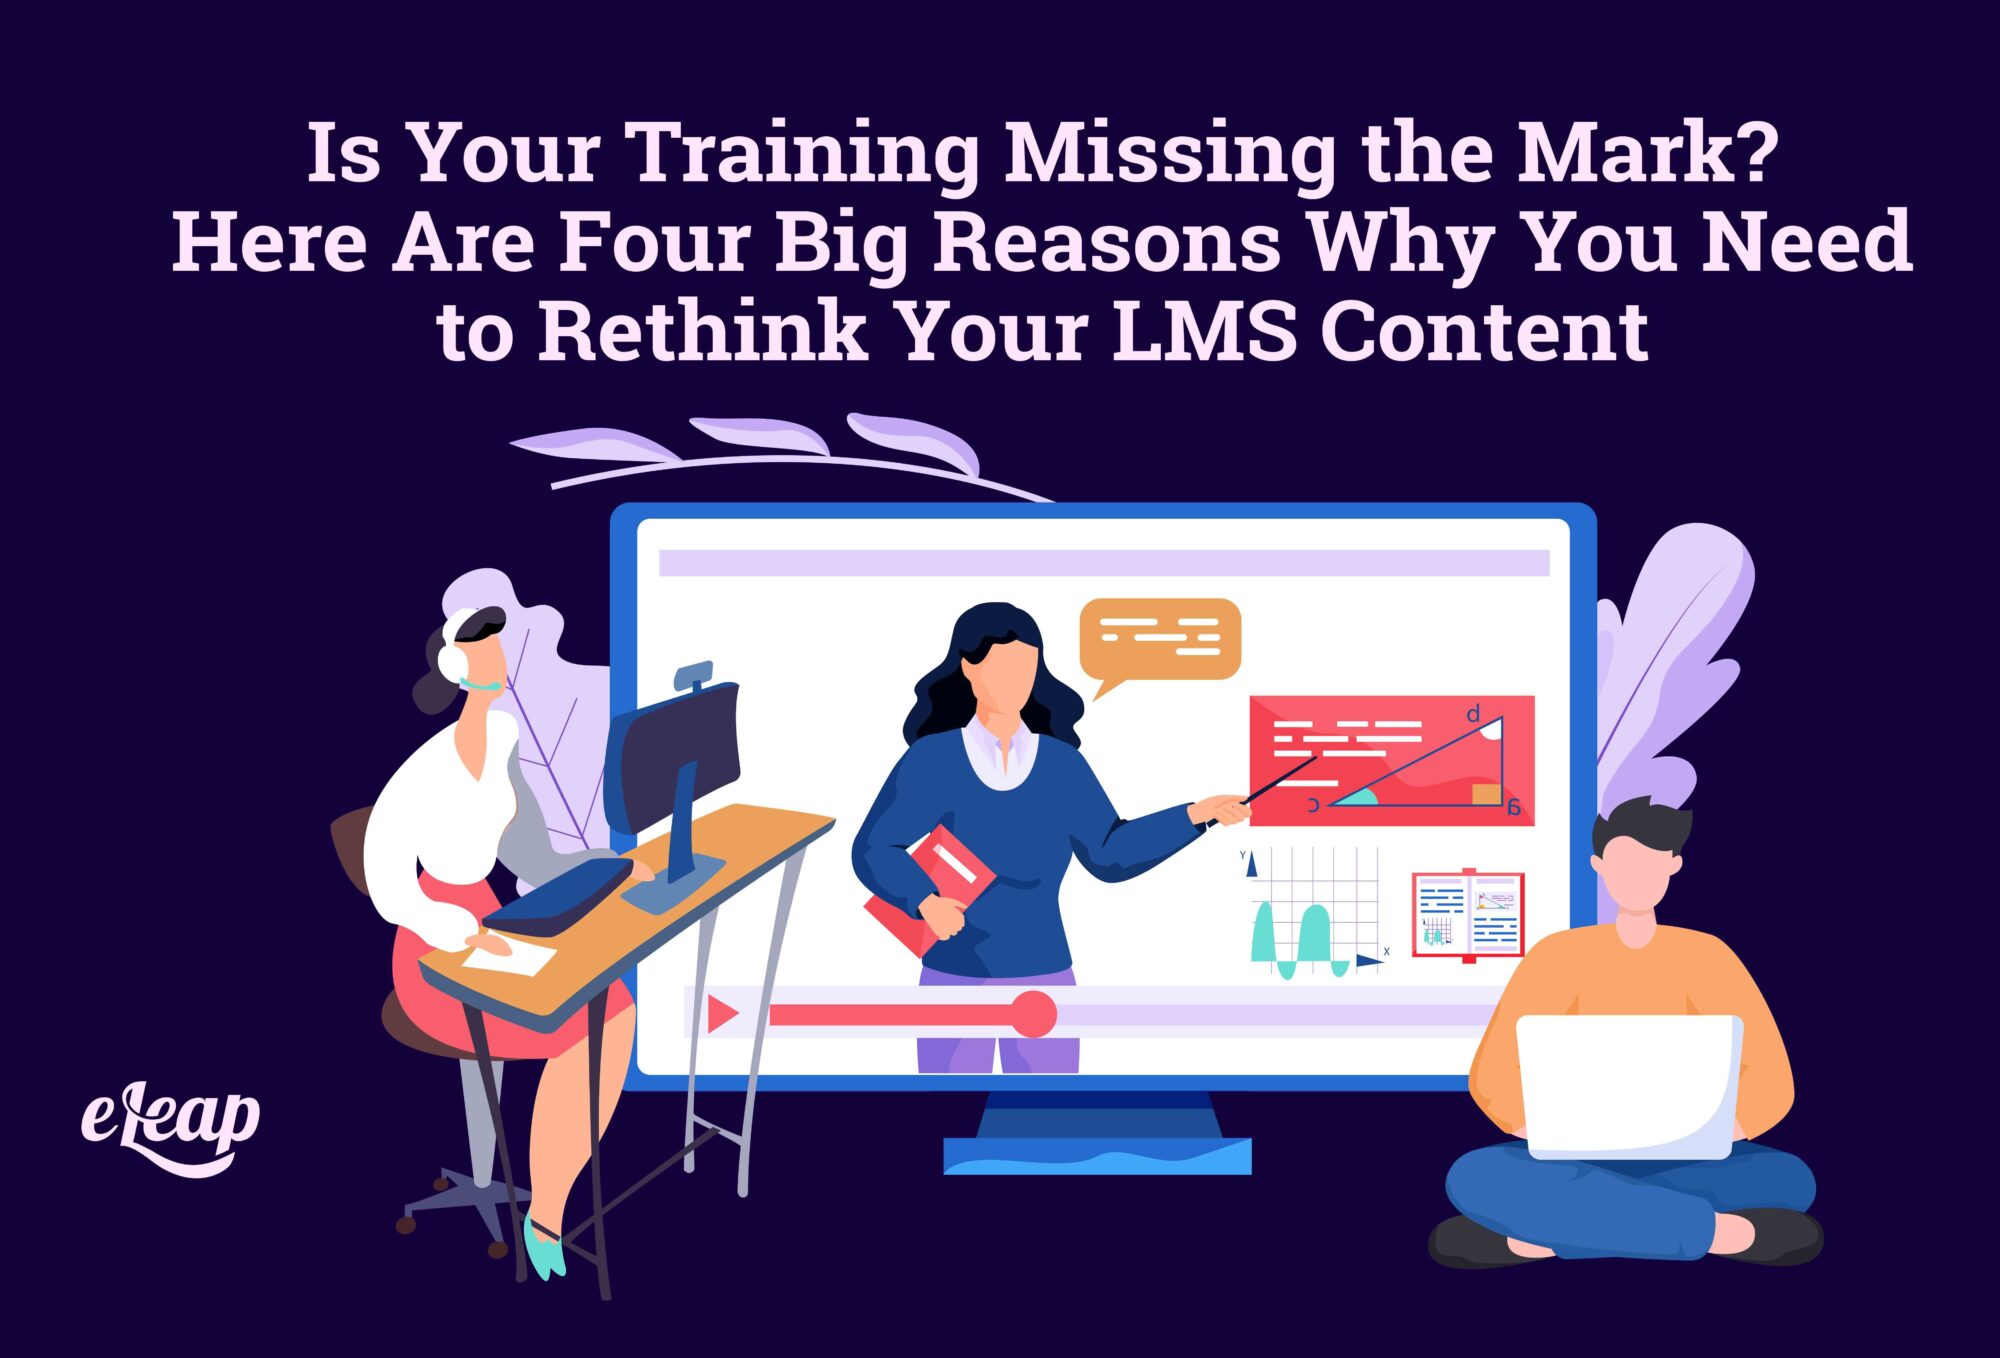 Is Your Training Missing the Mark? Here Are Four Big Reasons Why You Need to Rethink Your LMS Content